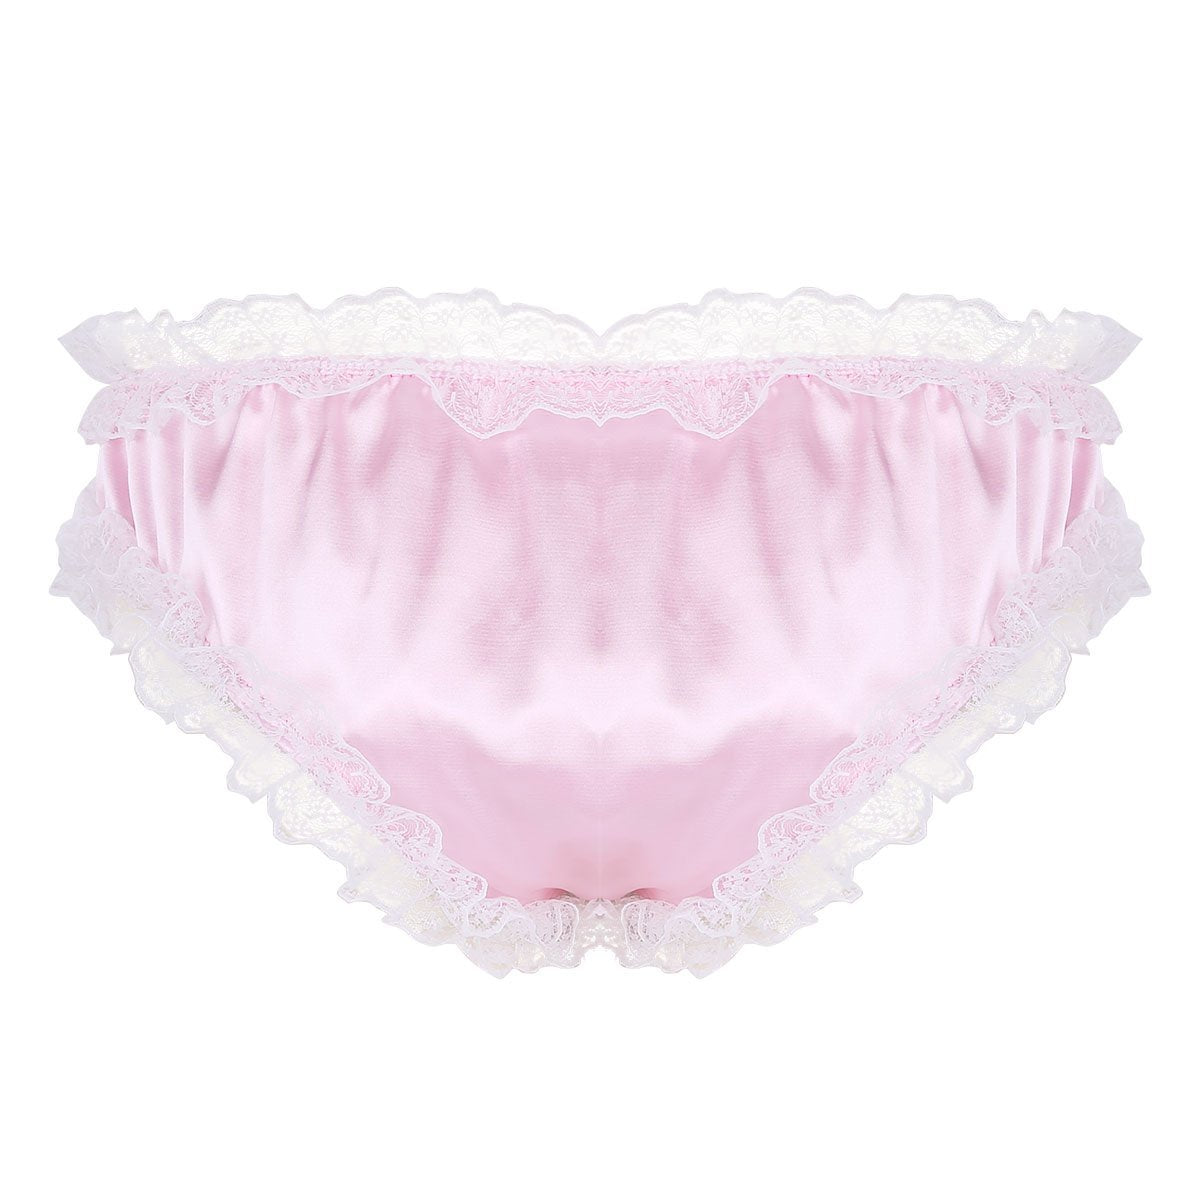 Mens Sissy Satin Panty Bikini Brief, Male Lingerie Pink and White Lace